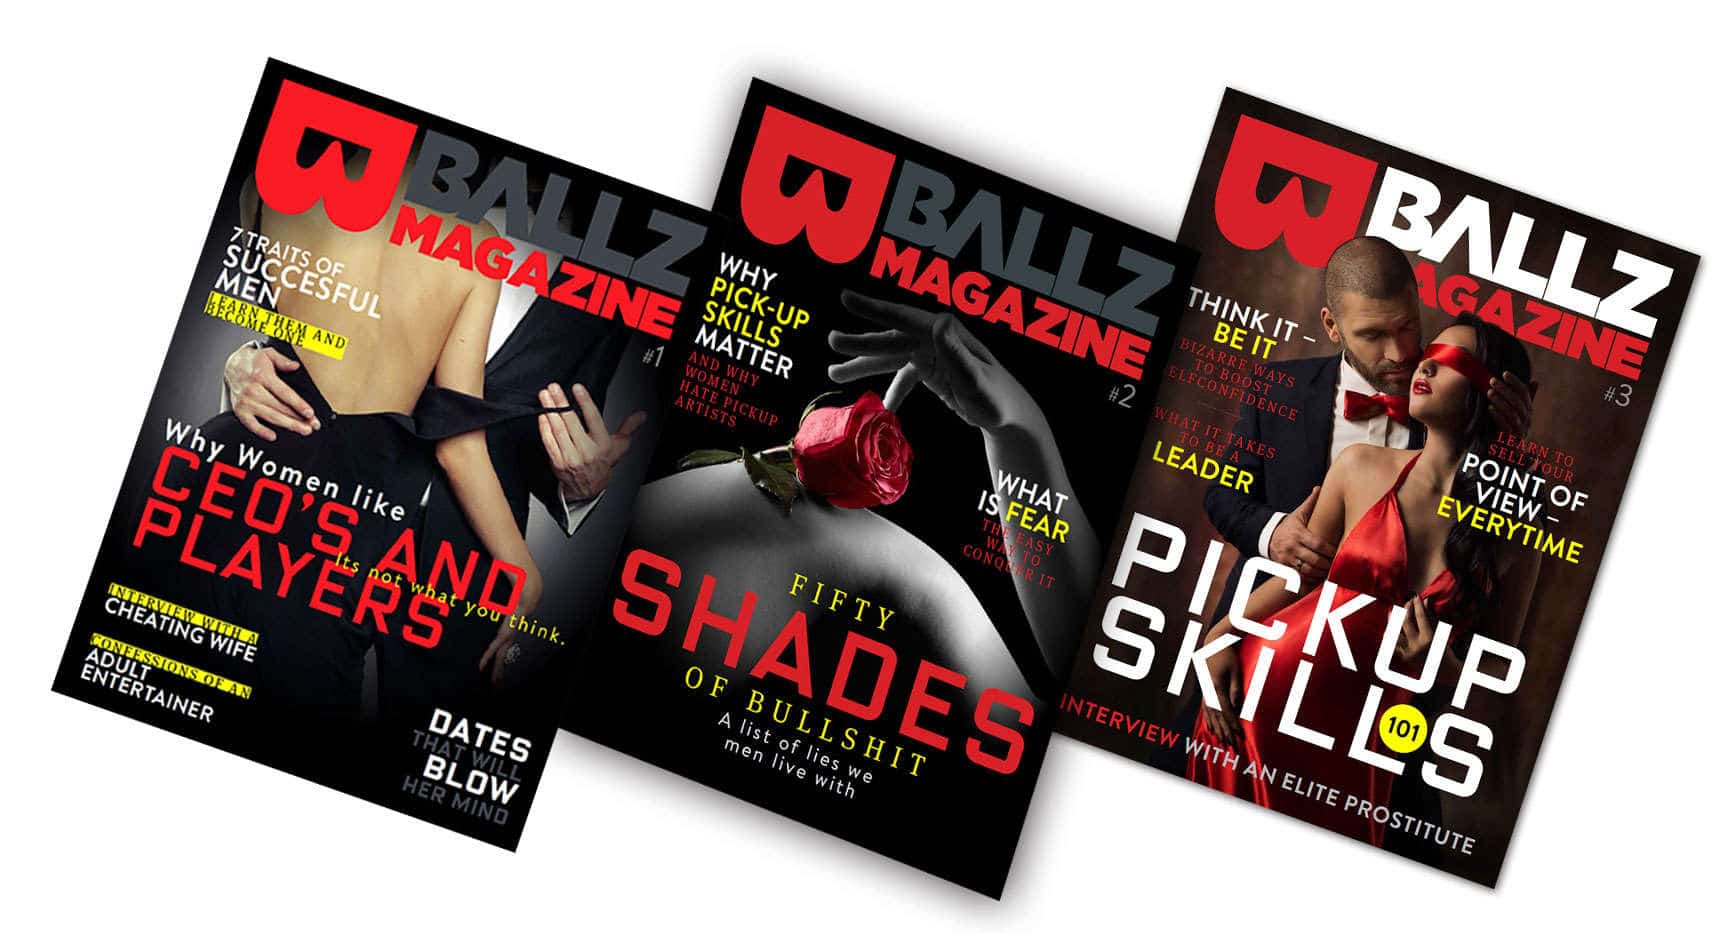 Ballz Magazine app - Download and get 3 magazines for Free